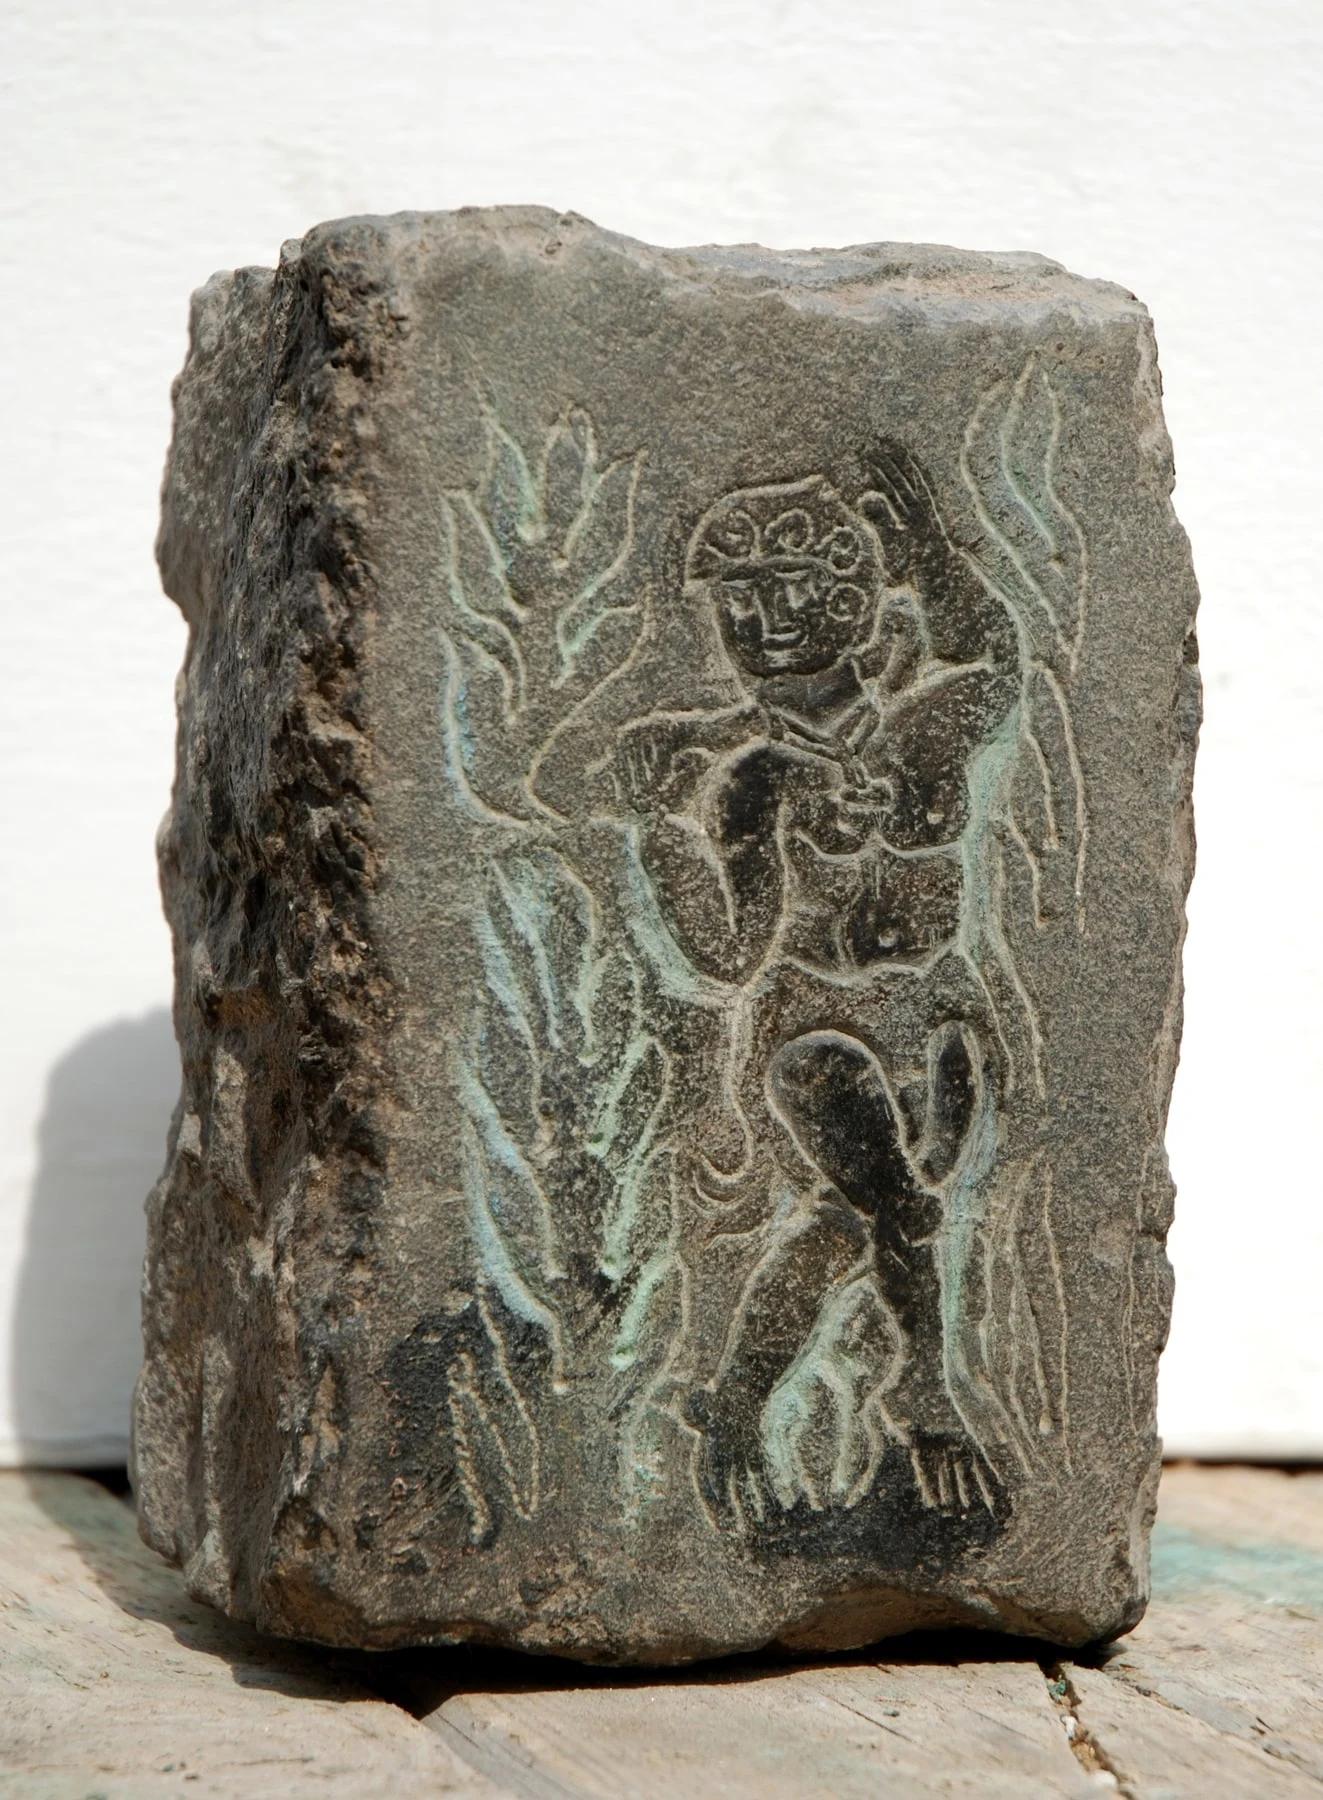 "Water Nymph" Black Basalt Sculpture 8" x 6" x 4" inch by Alfons Louis

Medium: black basalt

ABOUT THE ARTIST
Born in Cairo 1959- Graduated from faculty of fine art (painting) Alexandria.
In 1982 – Member of plastic art Egypt, member of Atelier